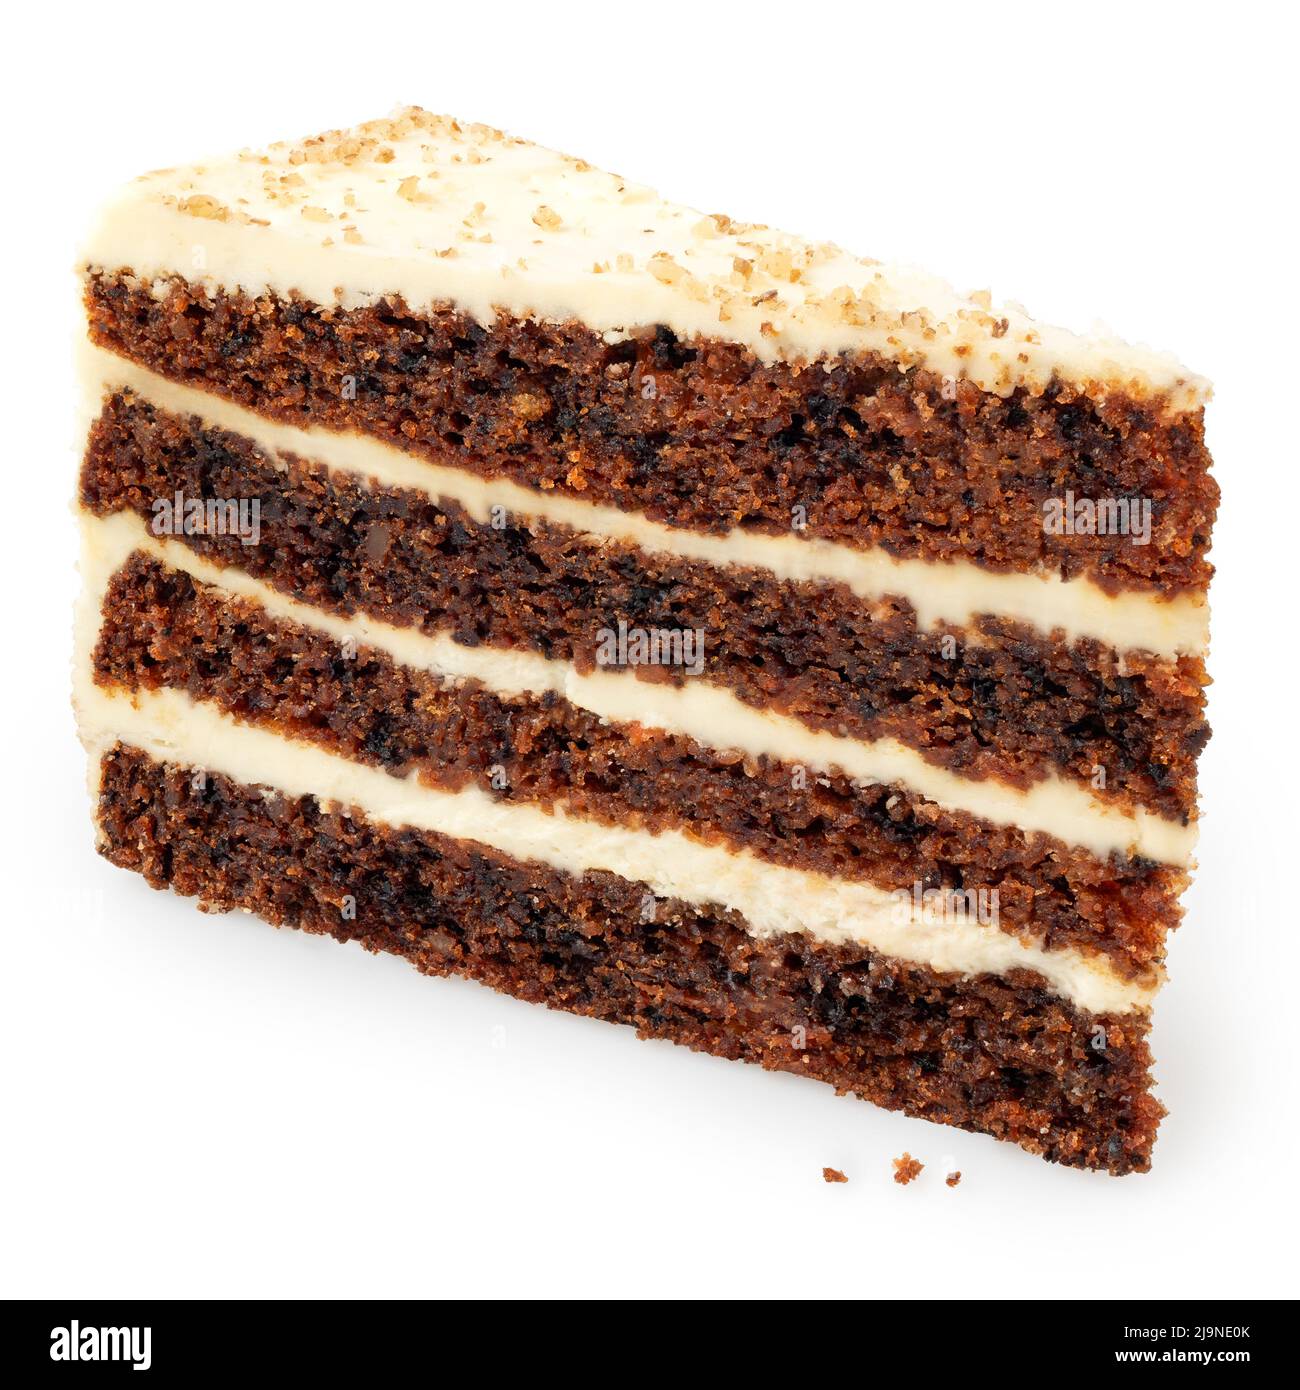 Slice of carrot cake with cream cheese filling and frosting isolated on white. Standing up. Stock Photo